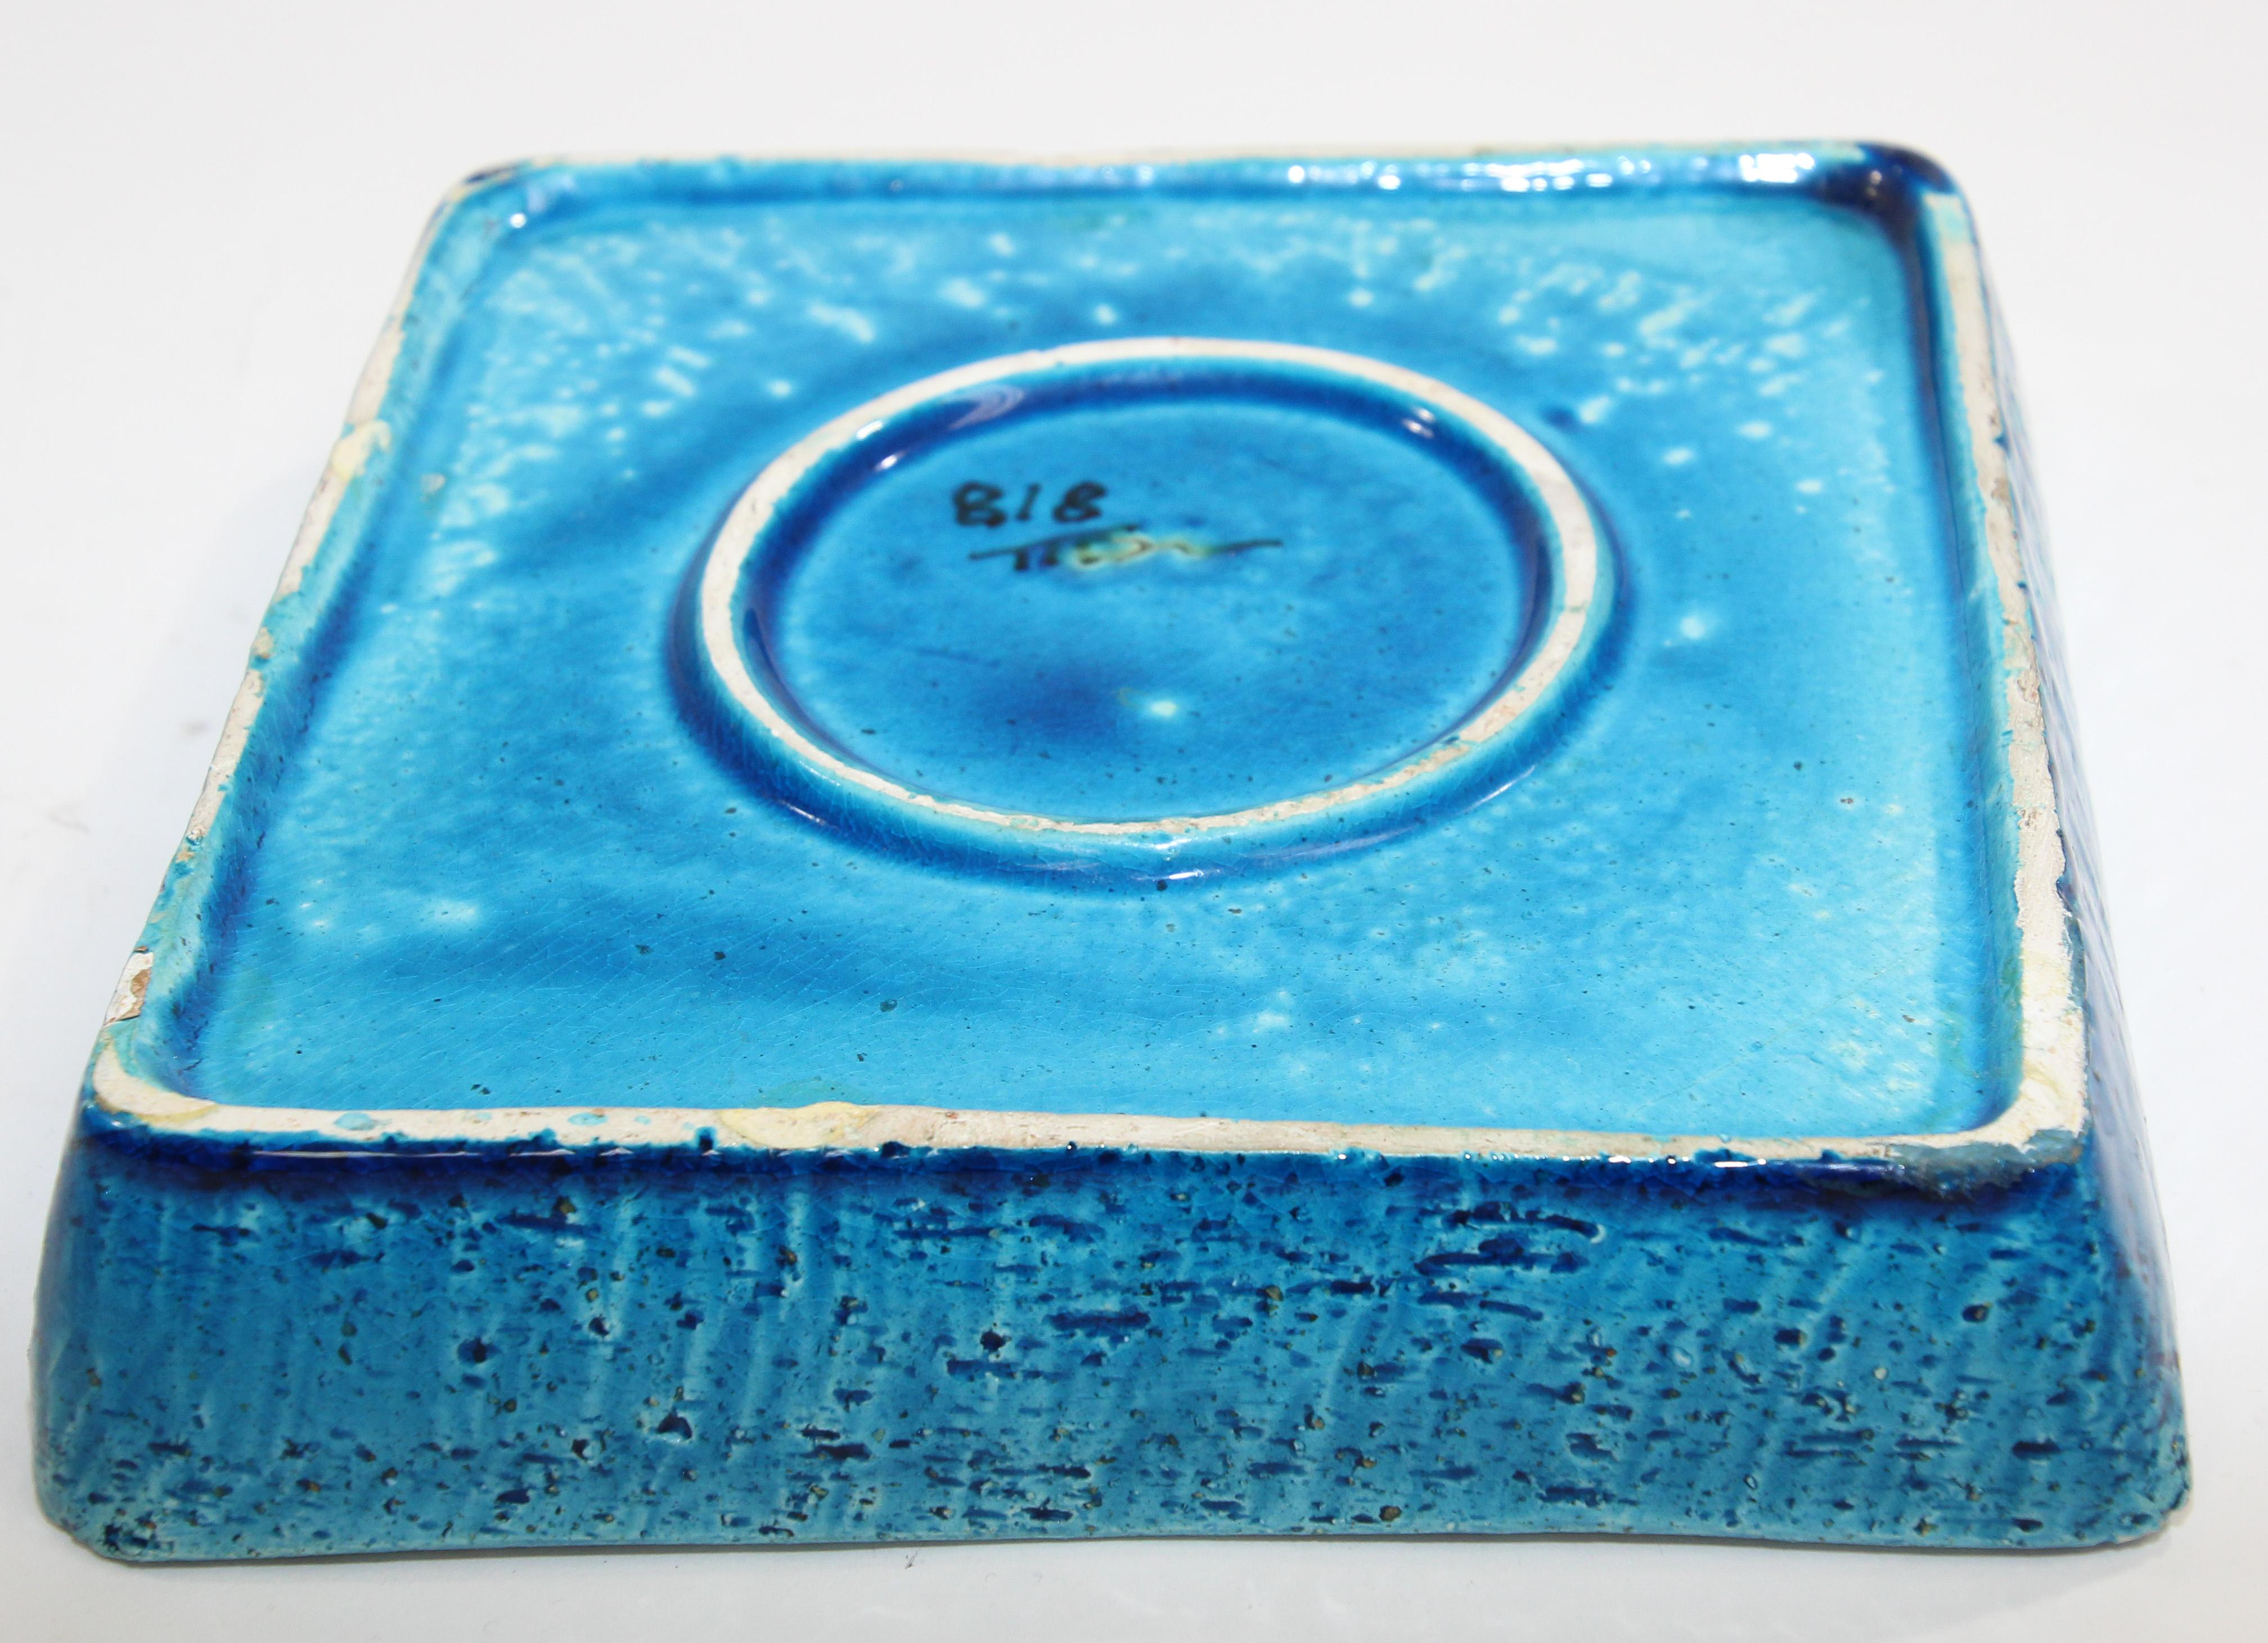 Blue Ceramic Ashtray by Aldo Londi for Bitossi Handcrafted in Italy For Sale 7